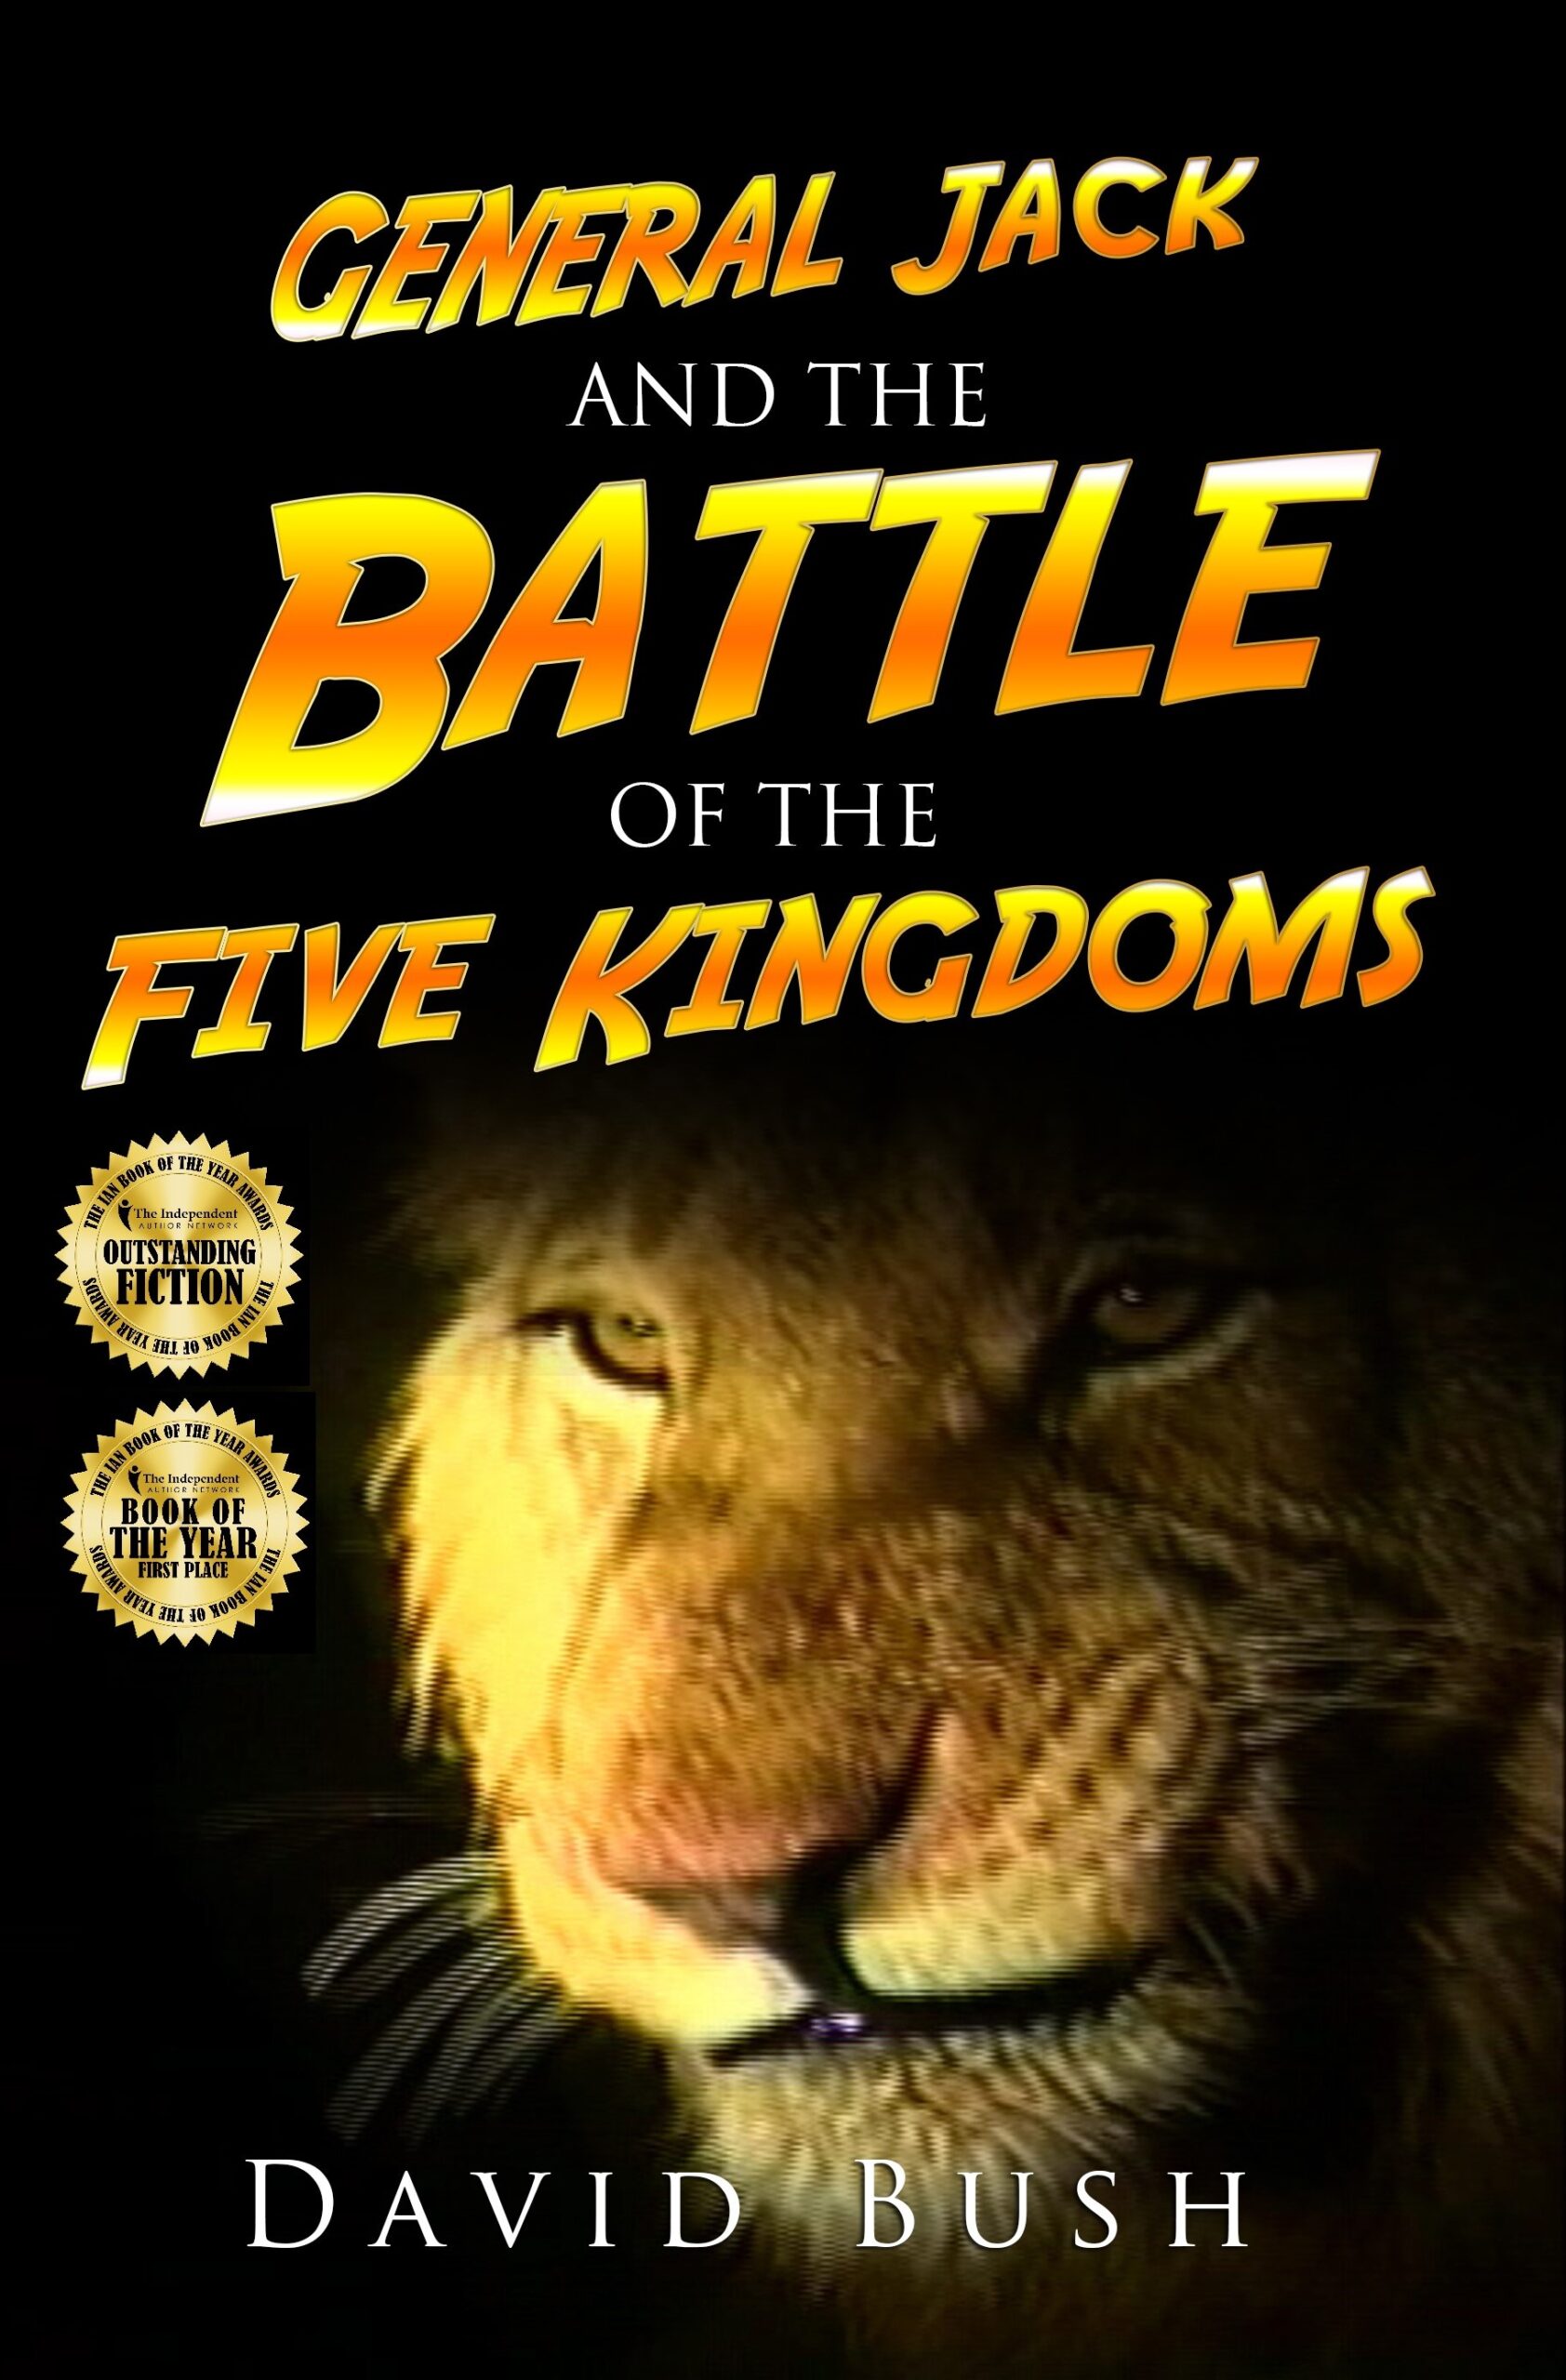 FREE: General Jack and the Battle of the Five Kingdoms by David Bush